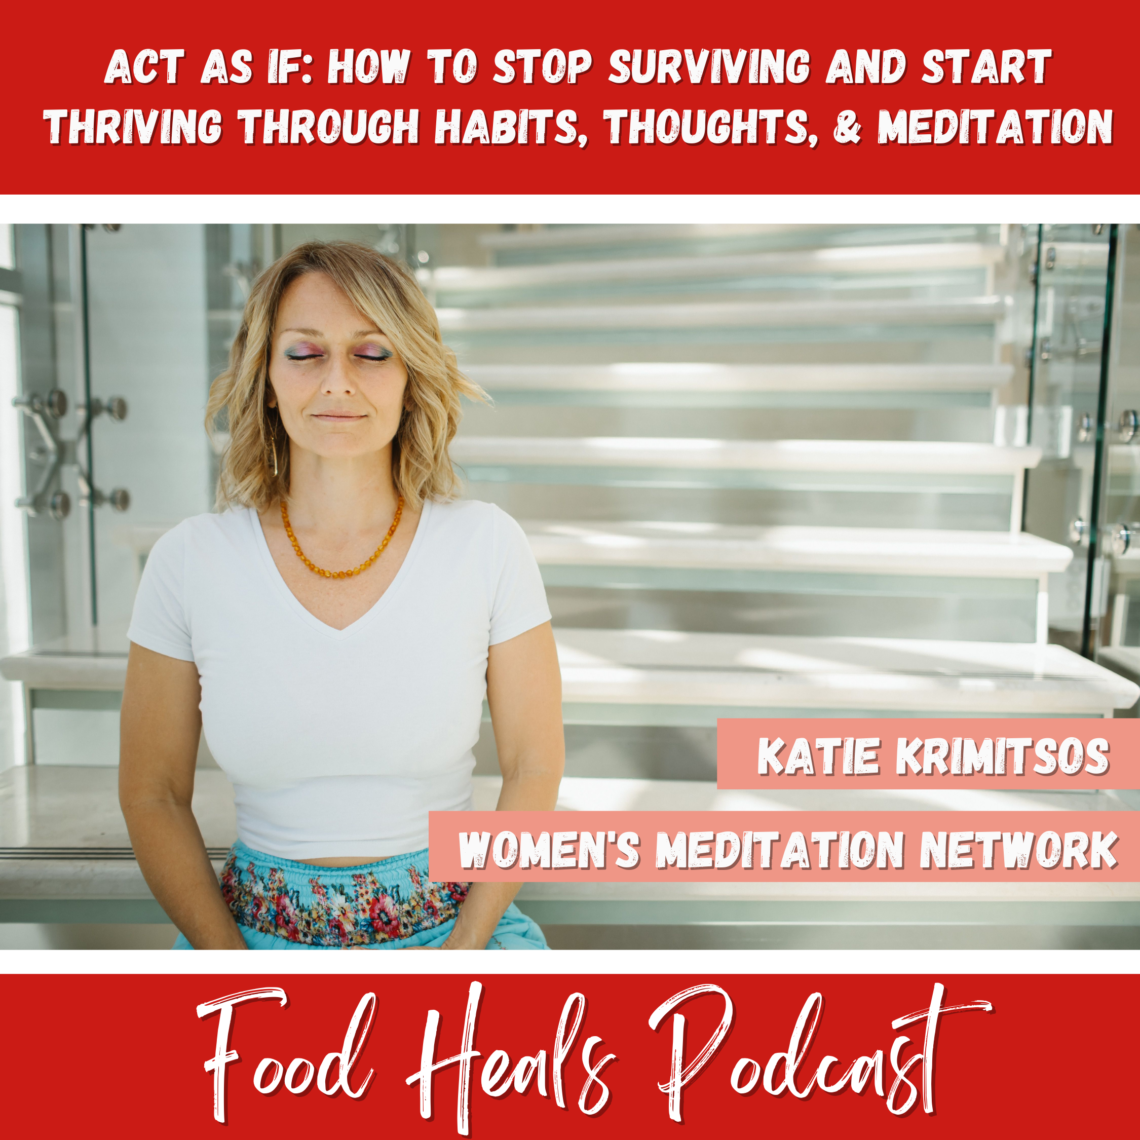 The Women's Meditation Network: Act As If: How to Stop Surviving and Start Thriving Through Habits, Thoughts, & Meditation with Katie Krimitsos